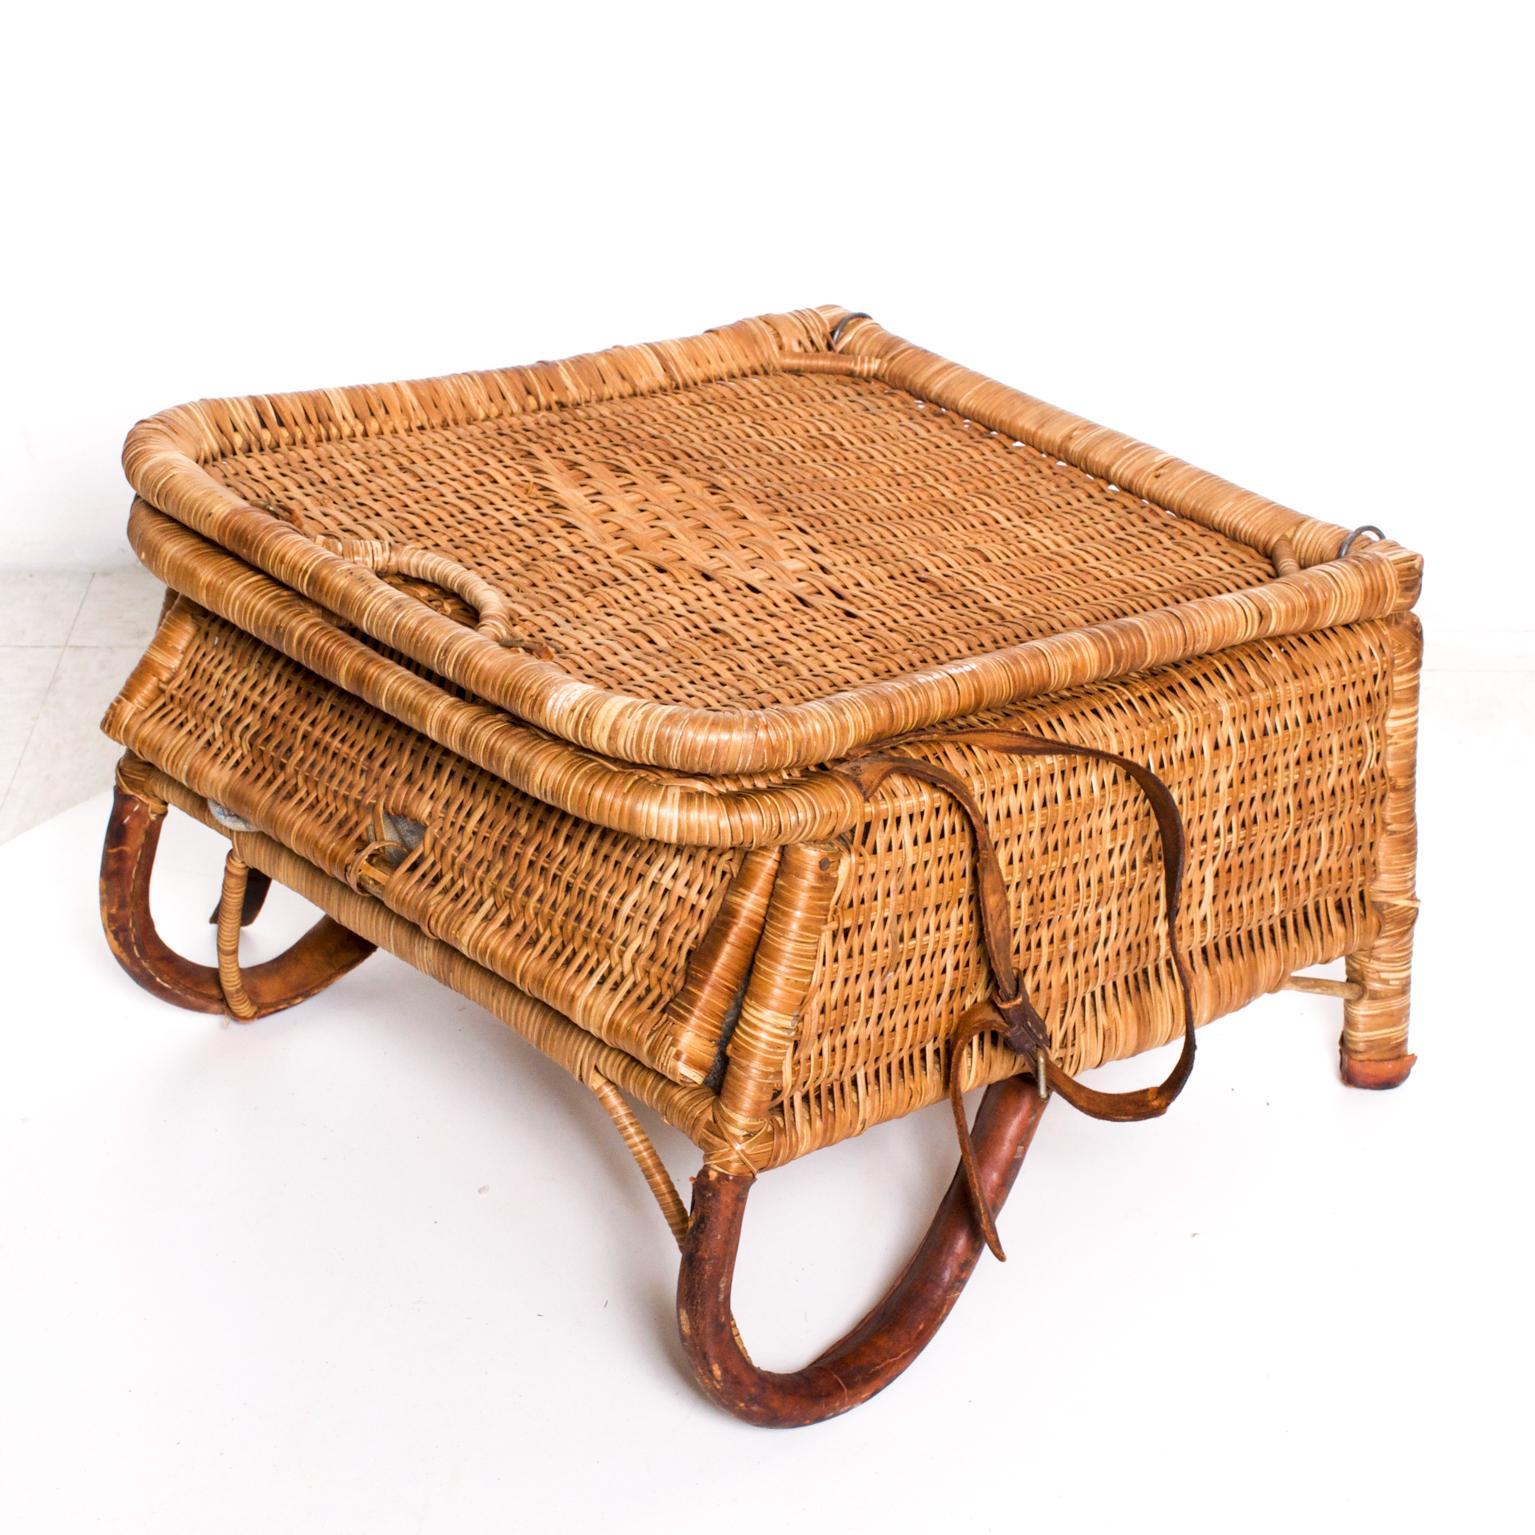 American Vintage Folding Beach Chair Woven Wicker and Leather Sculpted Portable Travel